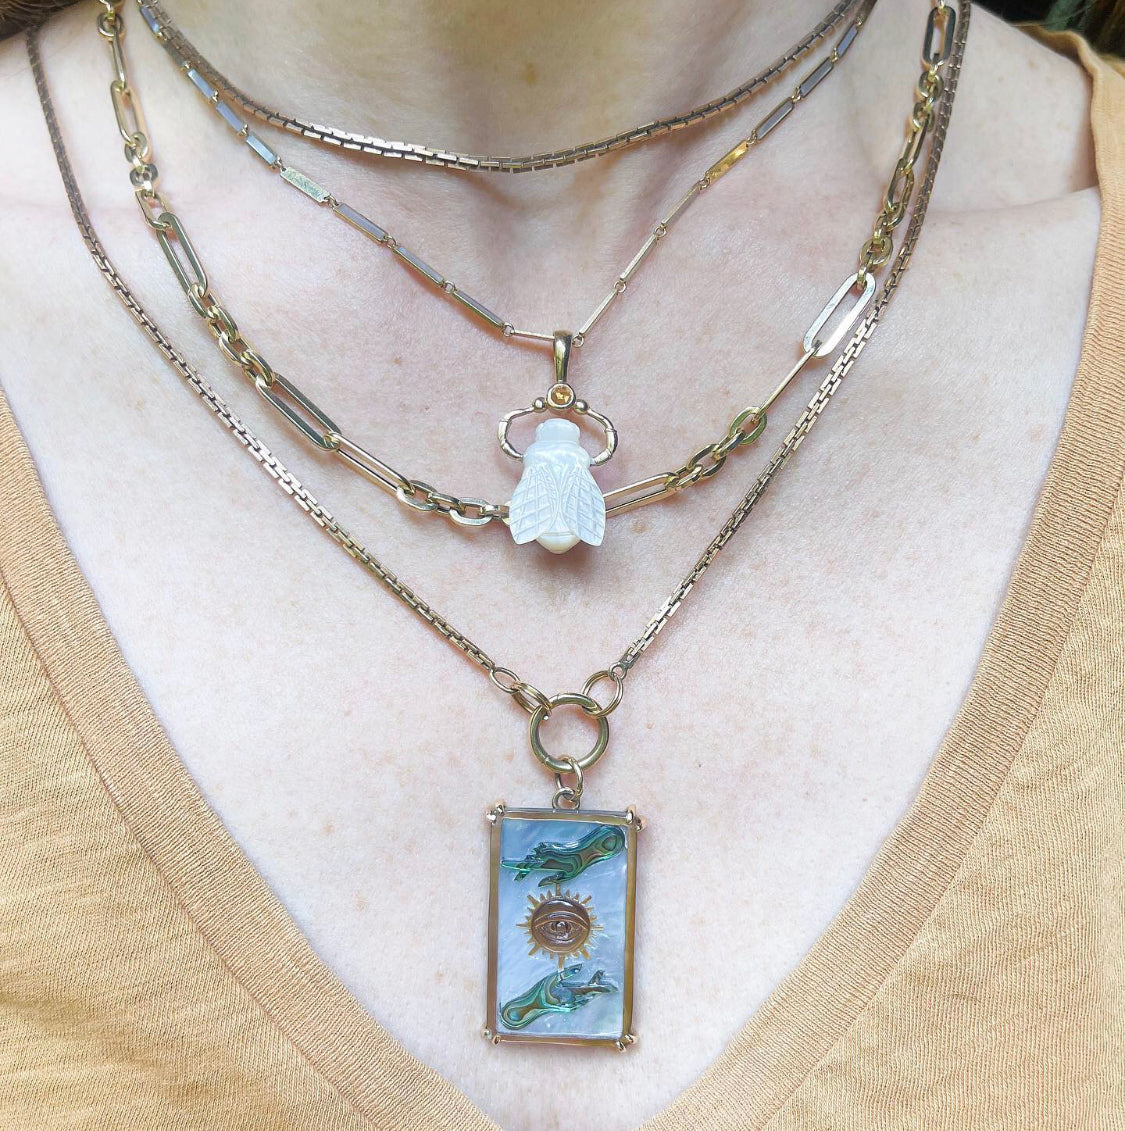 Sun Tarot Card Charm shown worn with a collection of chains and bee charm